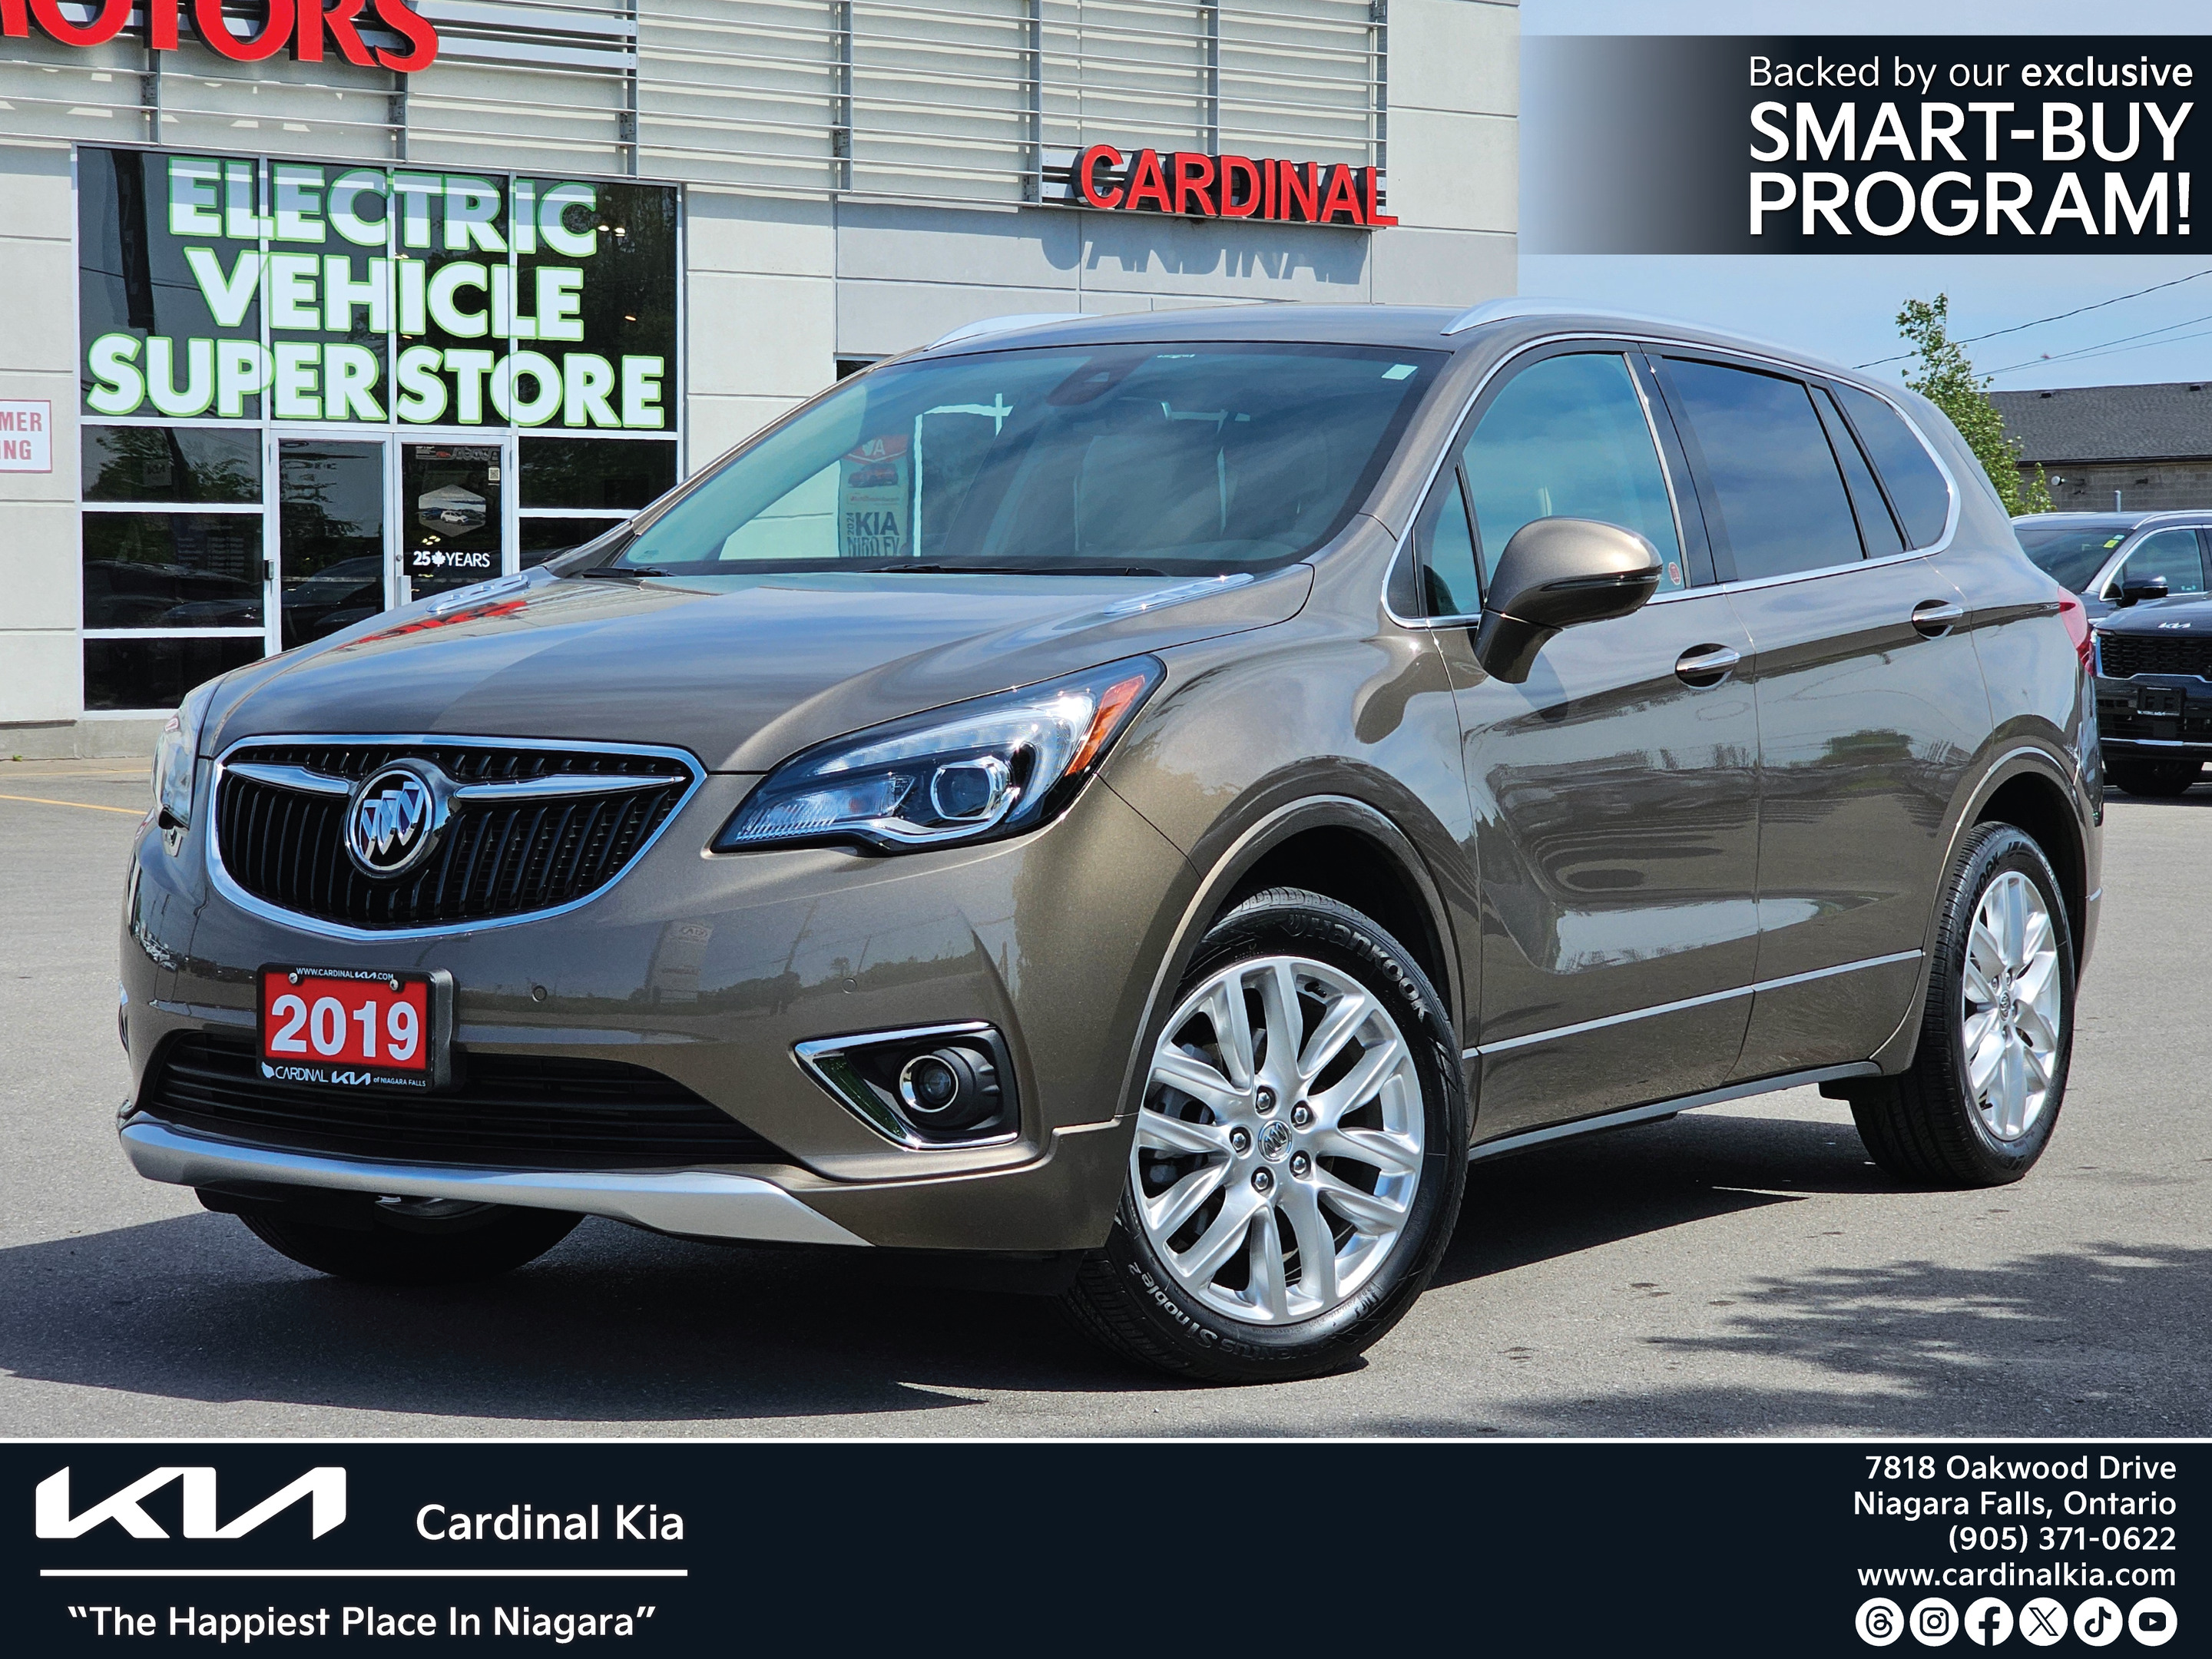 2019 Buick Envision AWD, Navi, Power Lift Gate, Heated Seats